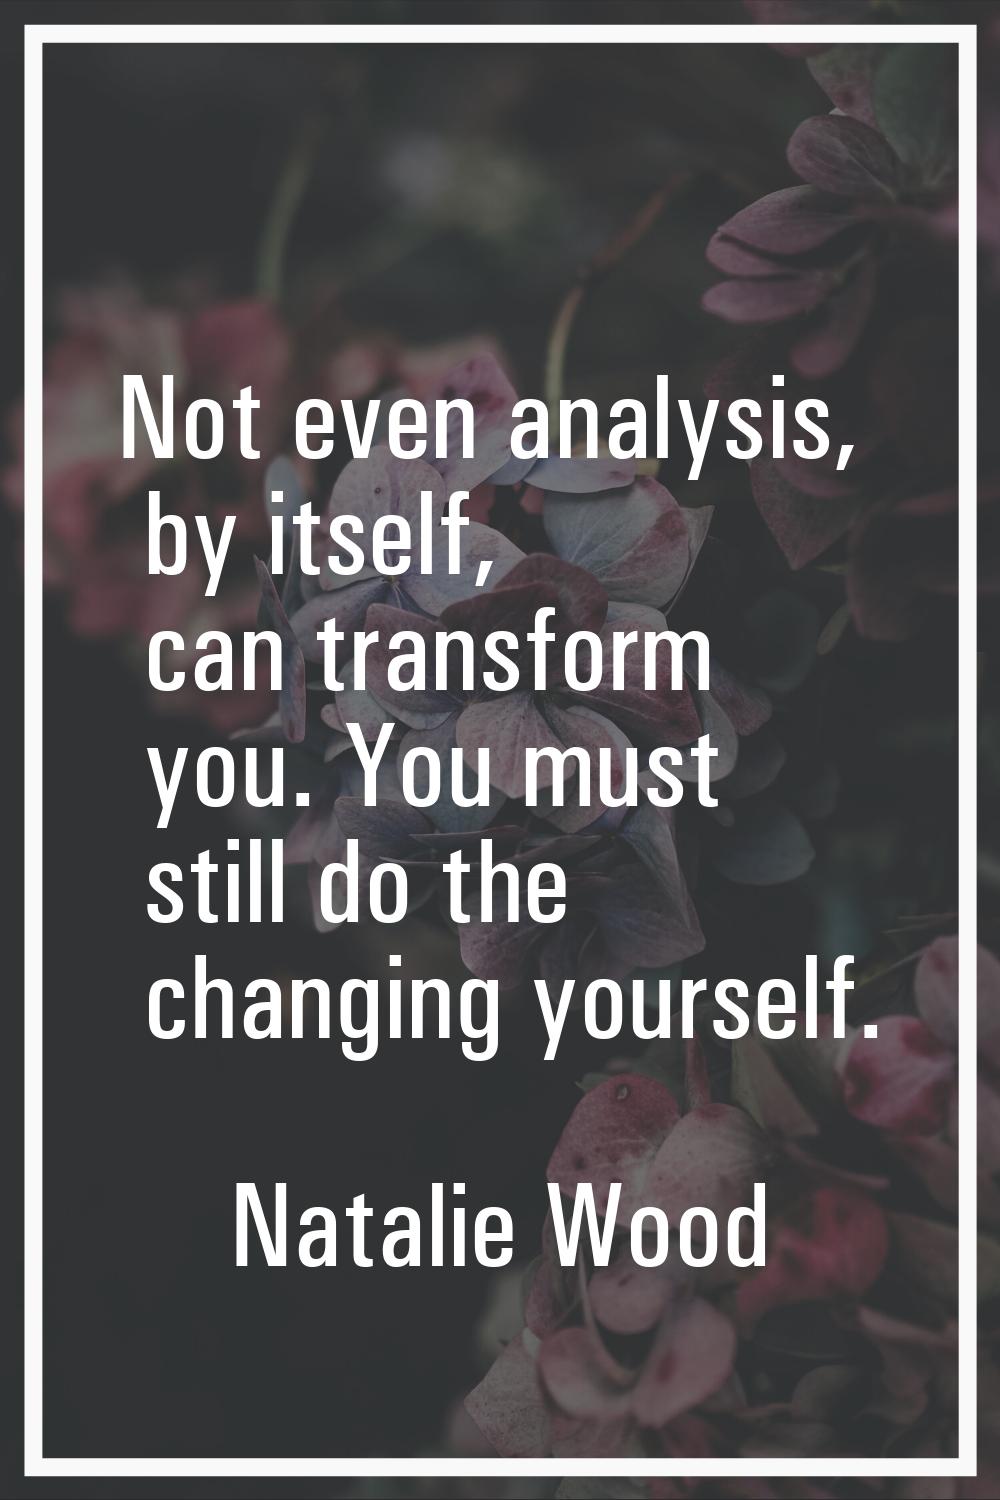 Not even analysis, by itself, can transform you. You must still do the changing yourself.